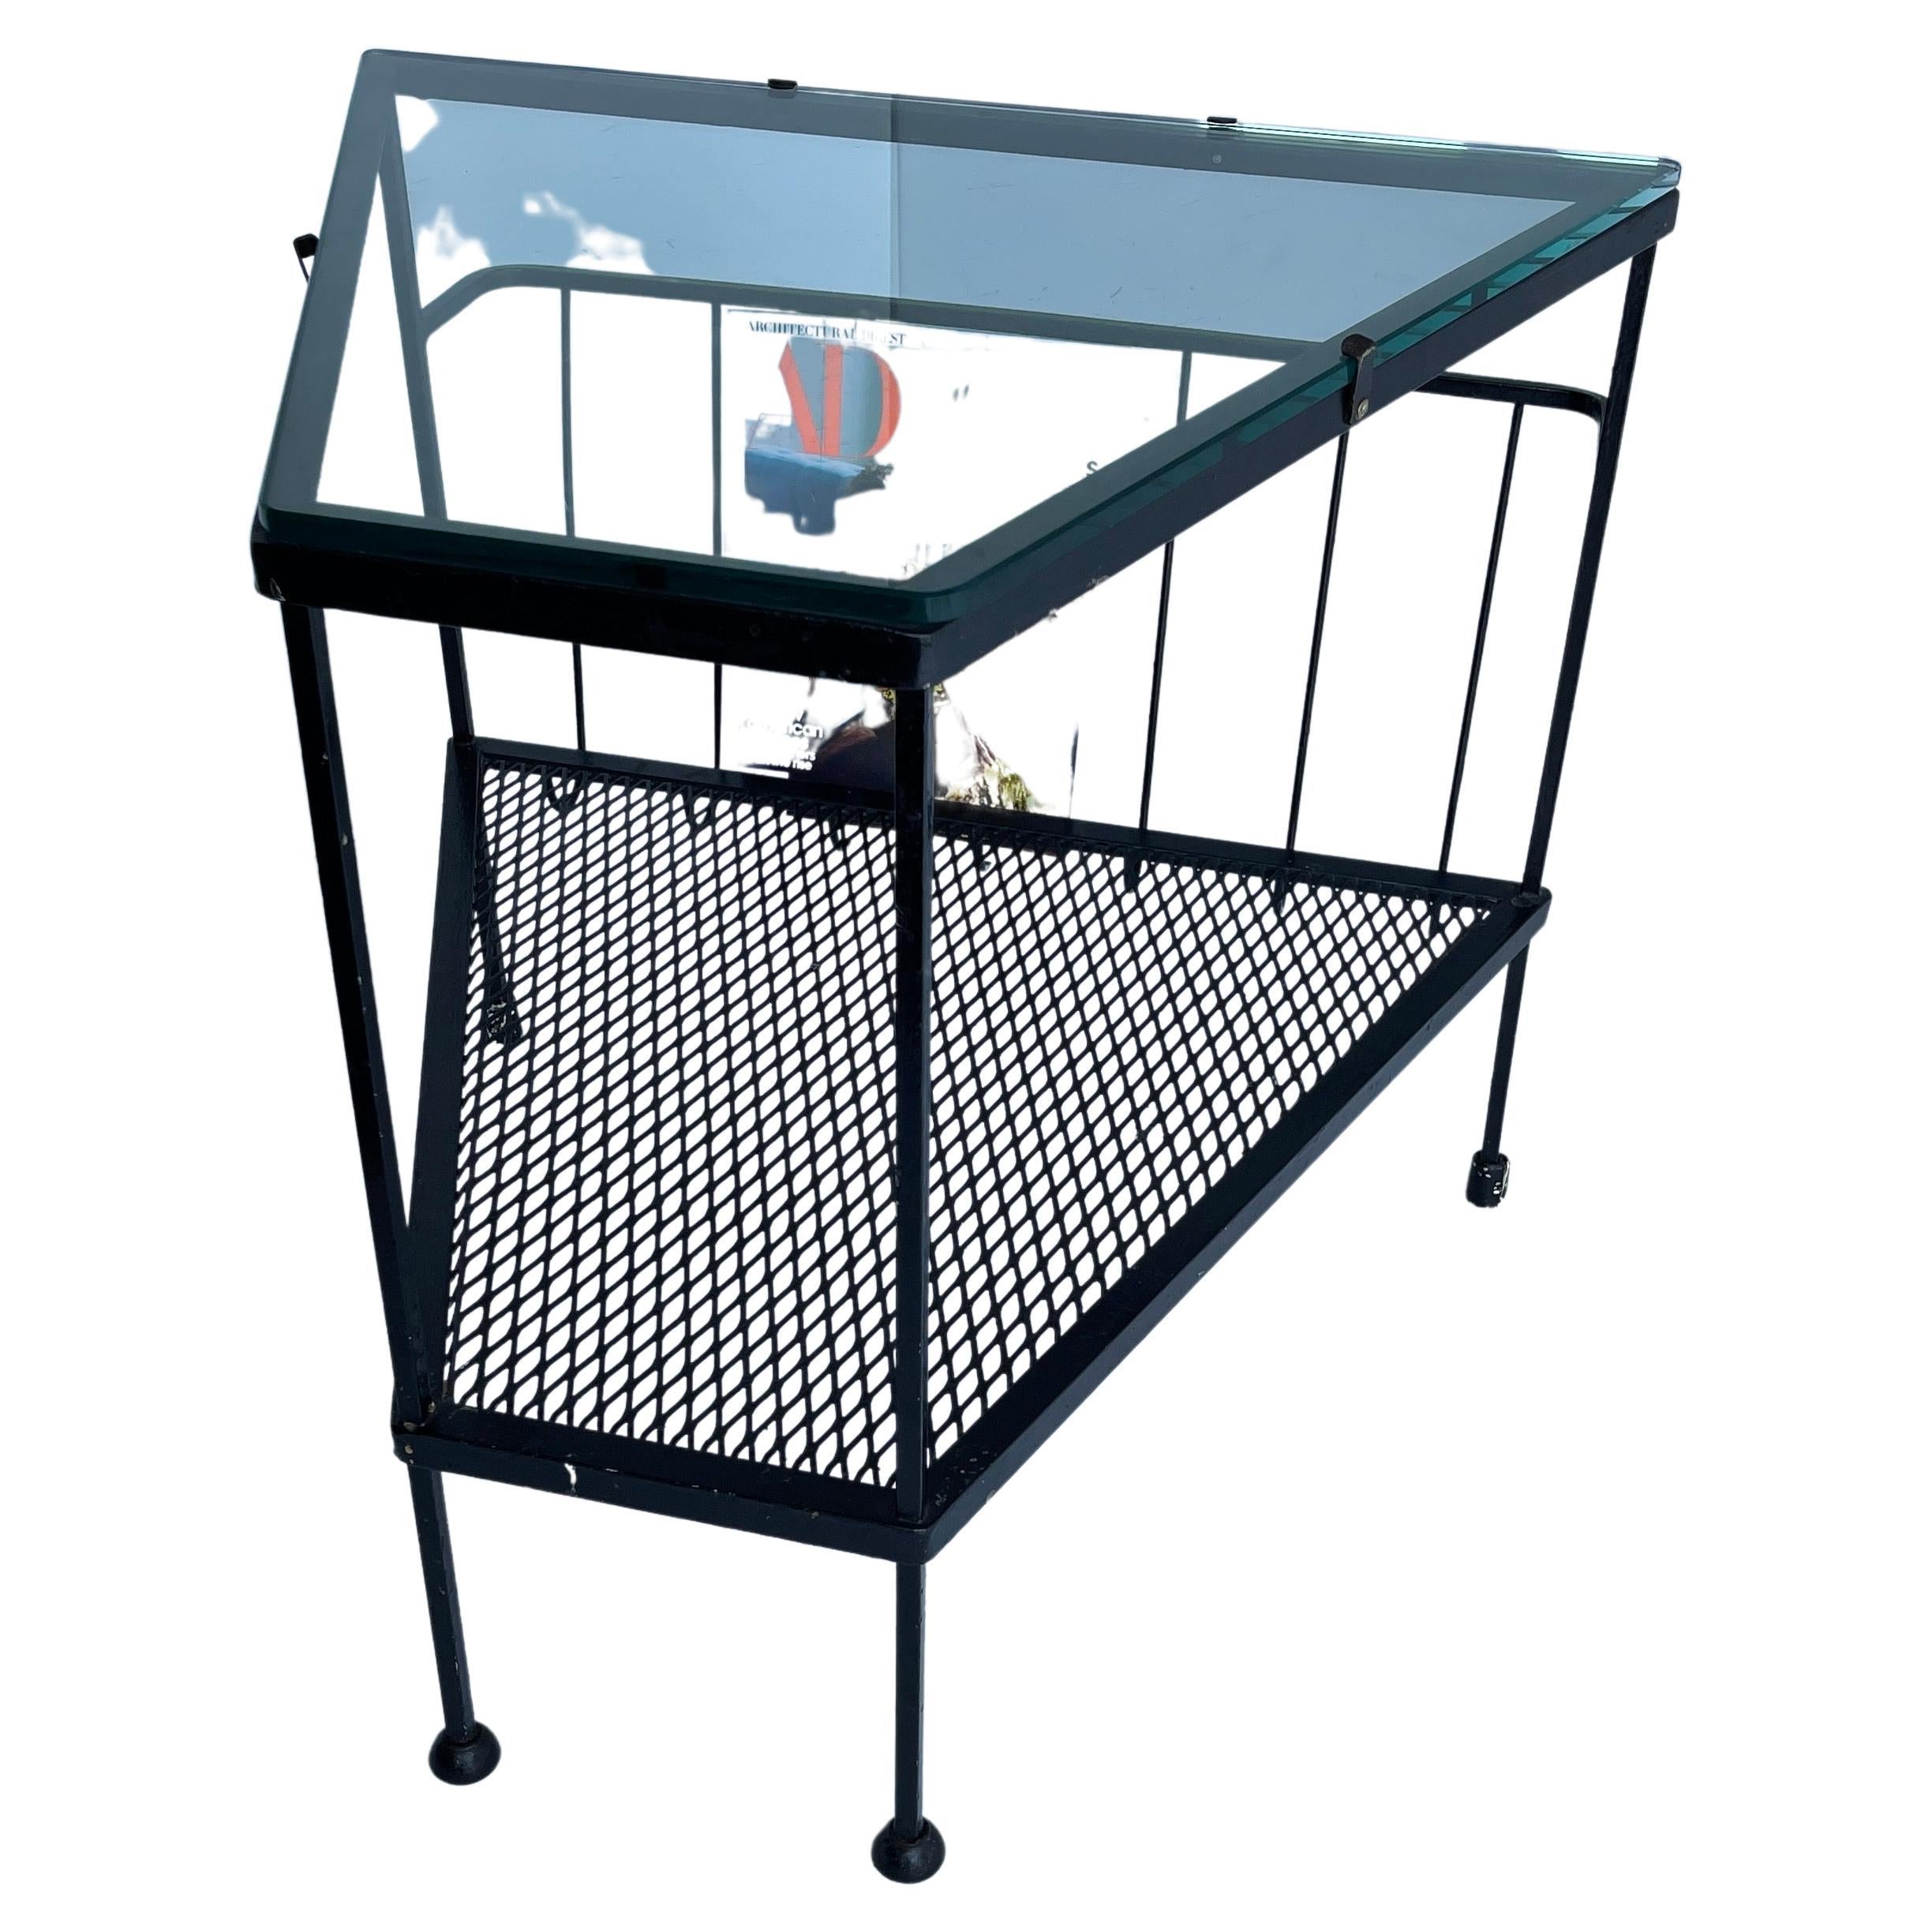 Black metal side table with glass top, Mid-Century Modern.
This is a fun and functional table and magazine rack. The solid metal table has the glass top with second tier that holds books or anything that you can display. The back side is open metal